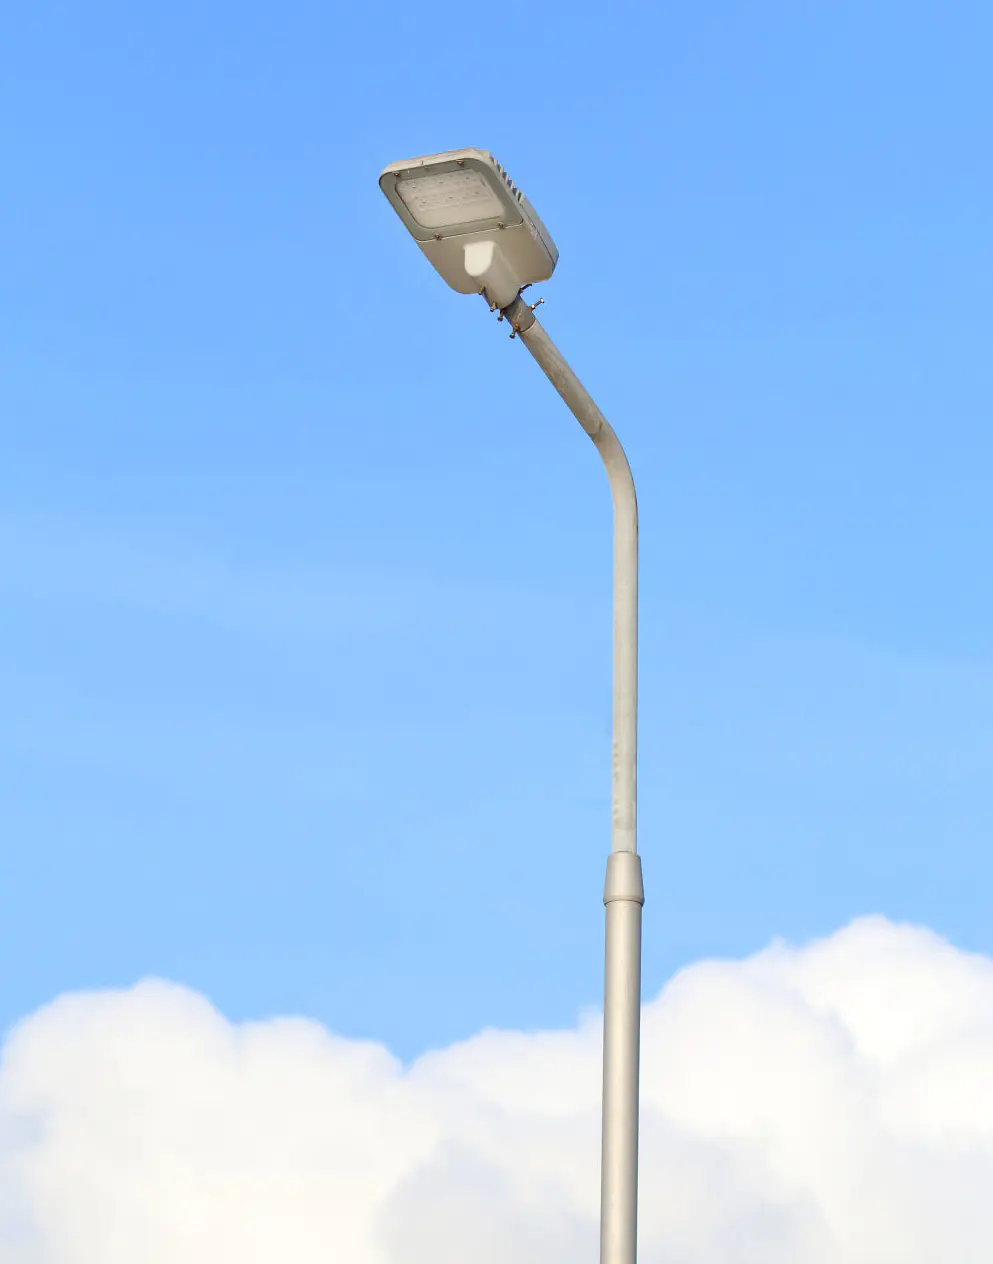 ALLTOP automatic 150w high brightness led street lights price factory for facility